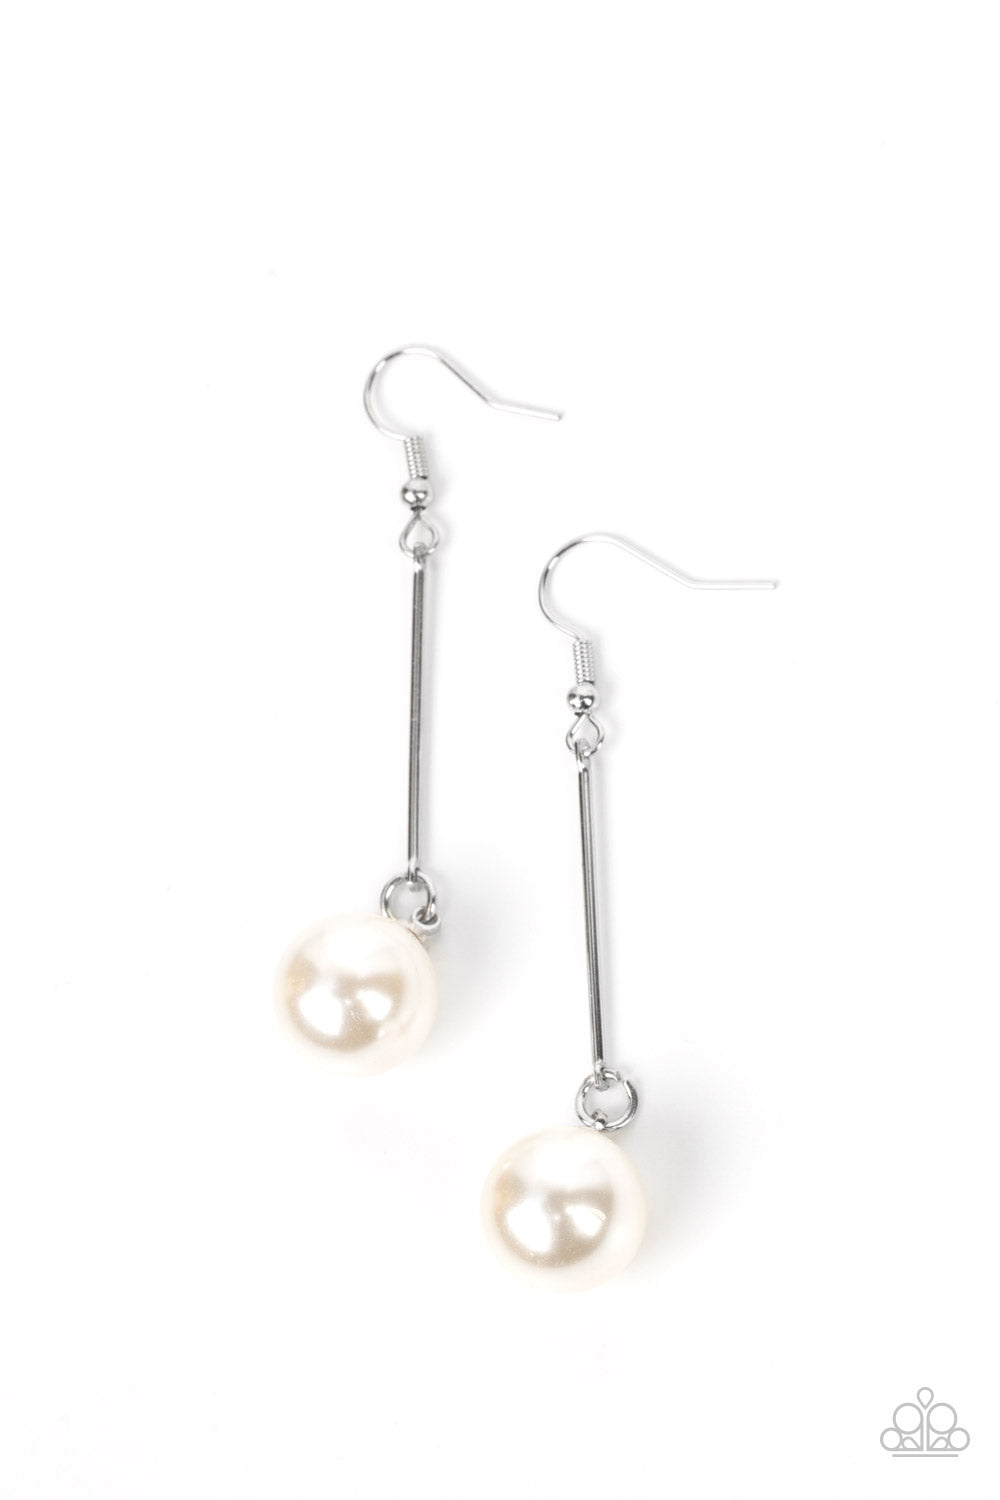 Paparazzi Accessories Pearl Redux - White An oversized white pearl delicately links to the bottom of a sleek silver rod, adding a timeless twist to the classic pearl palette. Earring attaches to a standard fishhook fitting. Sold as one pair of earrings. J